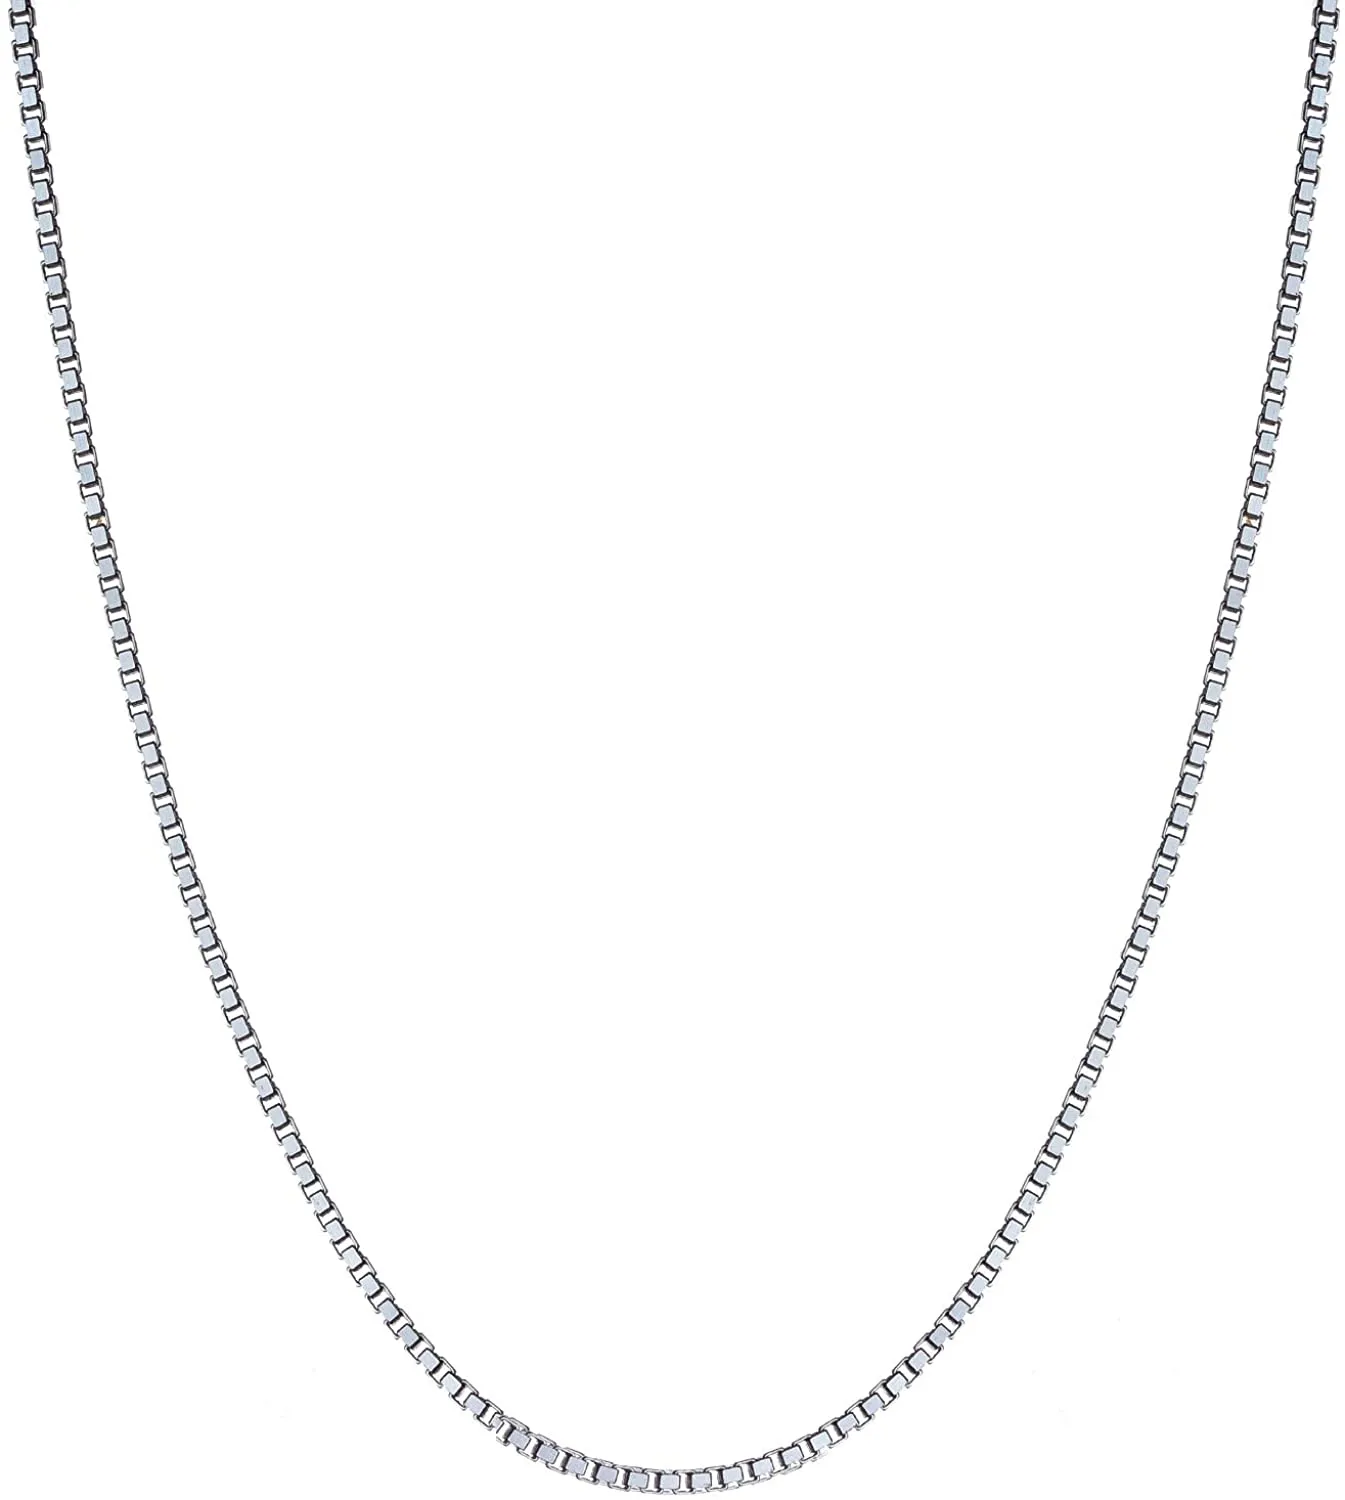 Whole 1 4mm 925 Sterling Silver Necklace Box Chains Jewelry 16 18 20 22 22 26 28 30 8サイズchoice260r